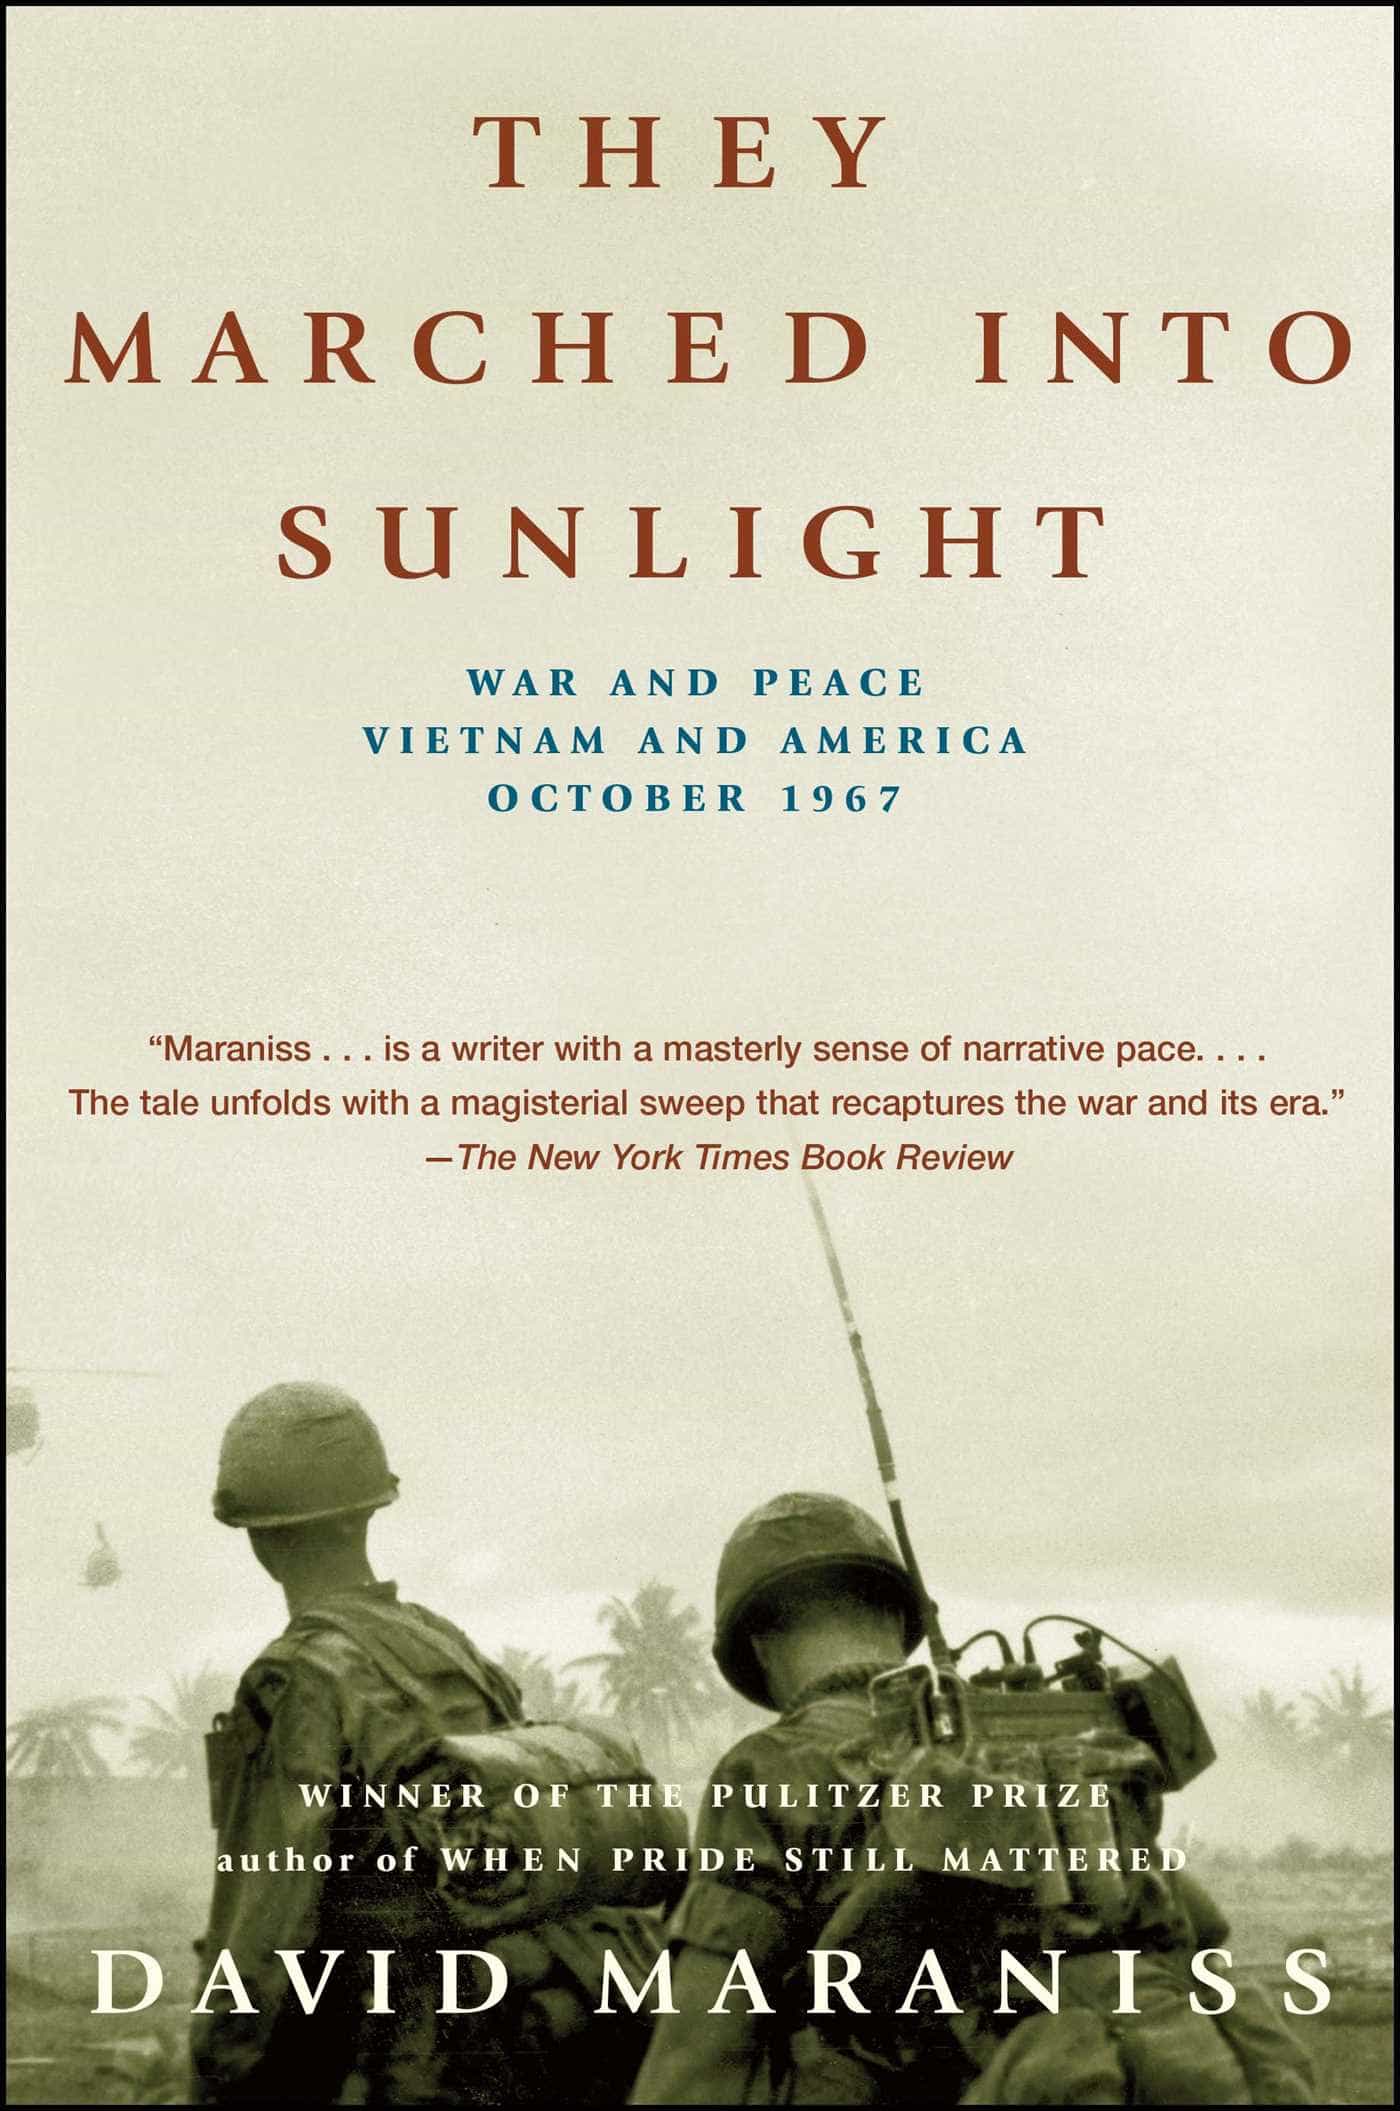 They Marched into Sunlight - War and Peace - Vietnam and America - October 1967